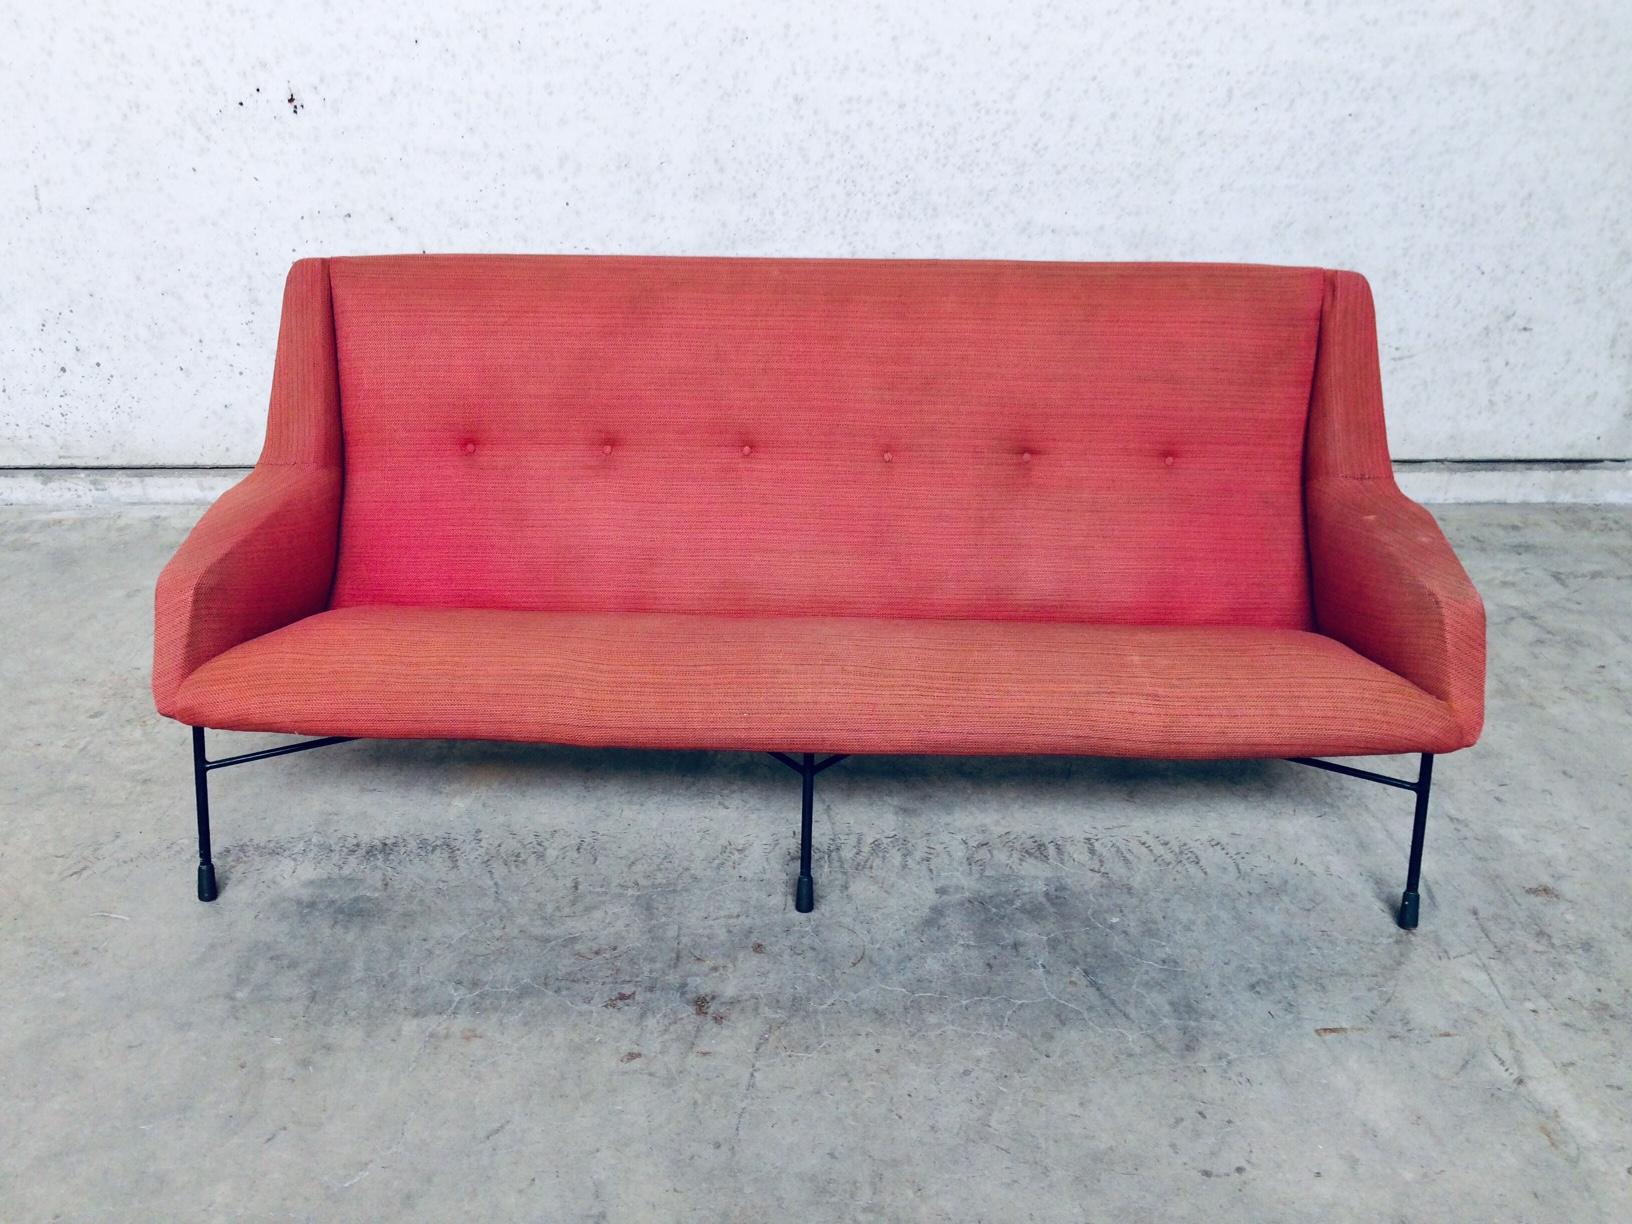 Vintage Mid-Century Modern Design model S12 3 seat Sofa by Alfred Hendrickx for Belform, Belgium 1958. All original, untouched fabric and vintage condition. Comes all complete with all 5 brass feet supports. Beautifull original dark pink / light red